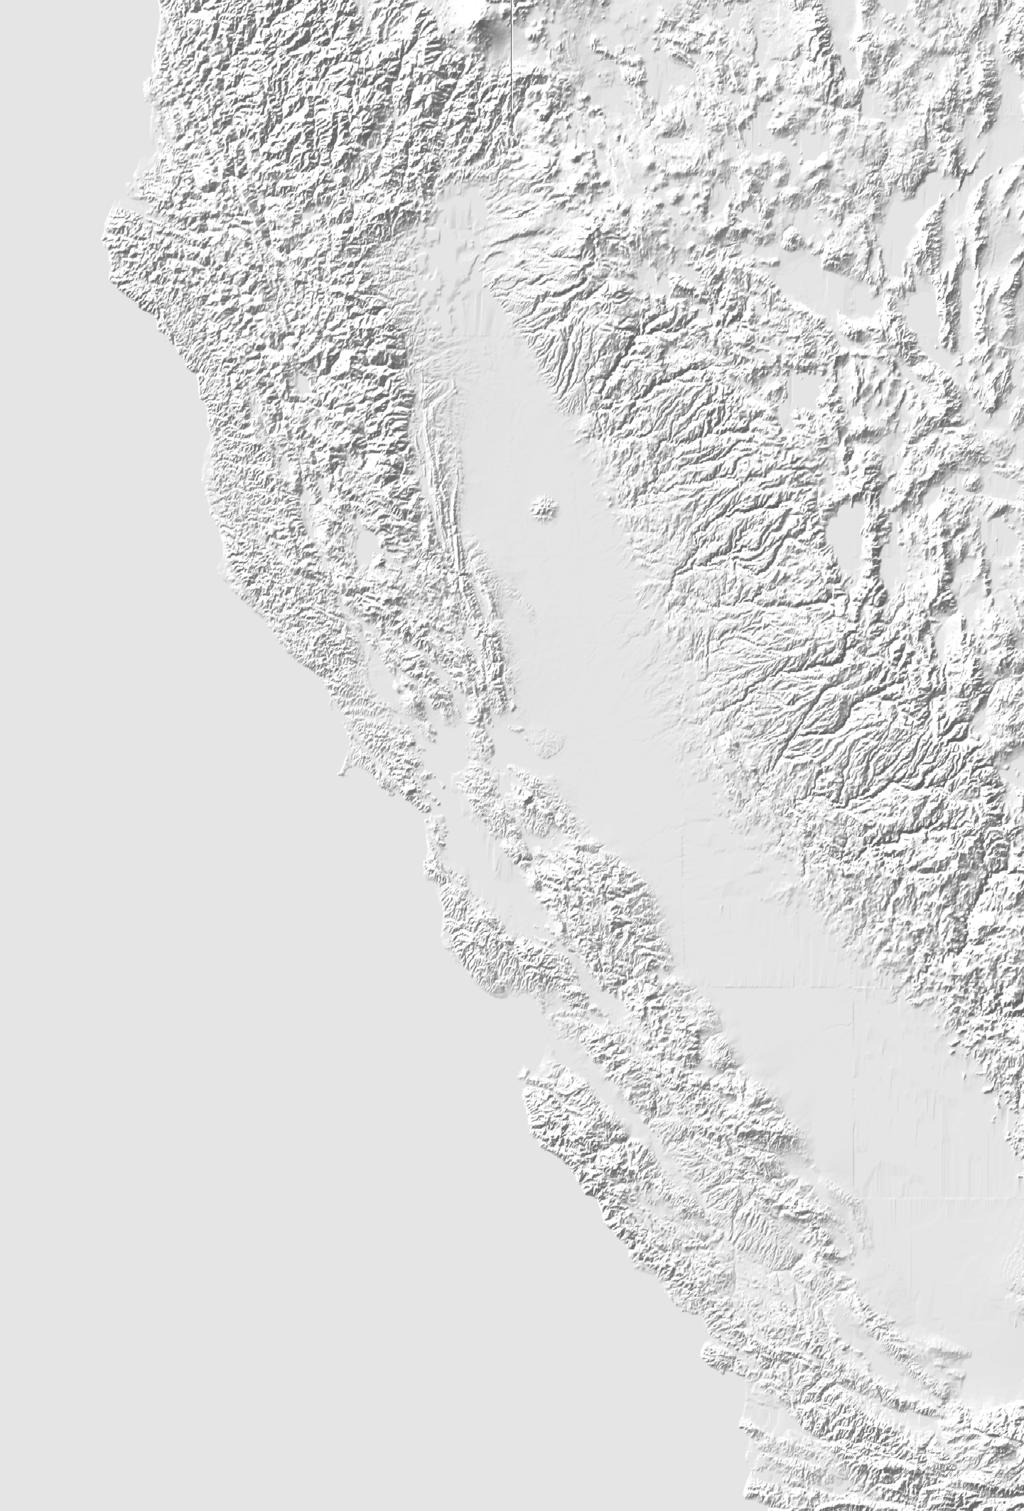 Suggested for PBO Mendocino 10 Strain Calif-Cascadia 0 Strain 0 GPS covered by Cascadia group Existing or soon-to-be Continuous GPS Campaign GPS Existing Strain Mini-PBO Strain 40 Northern SAF 5